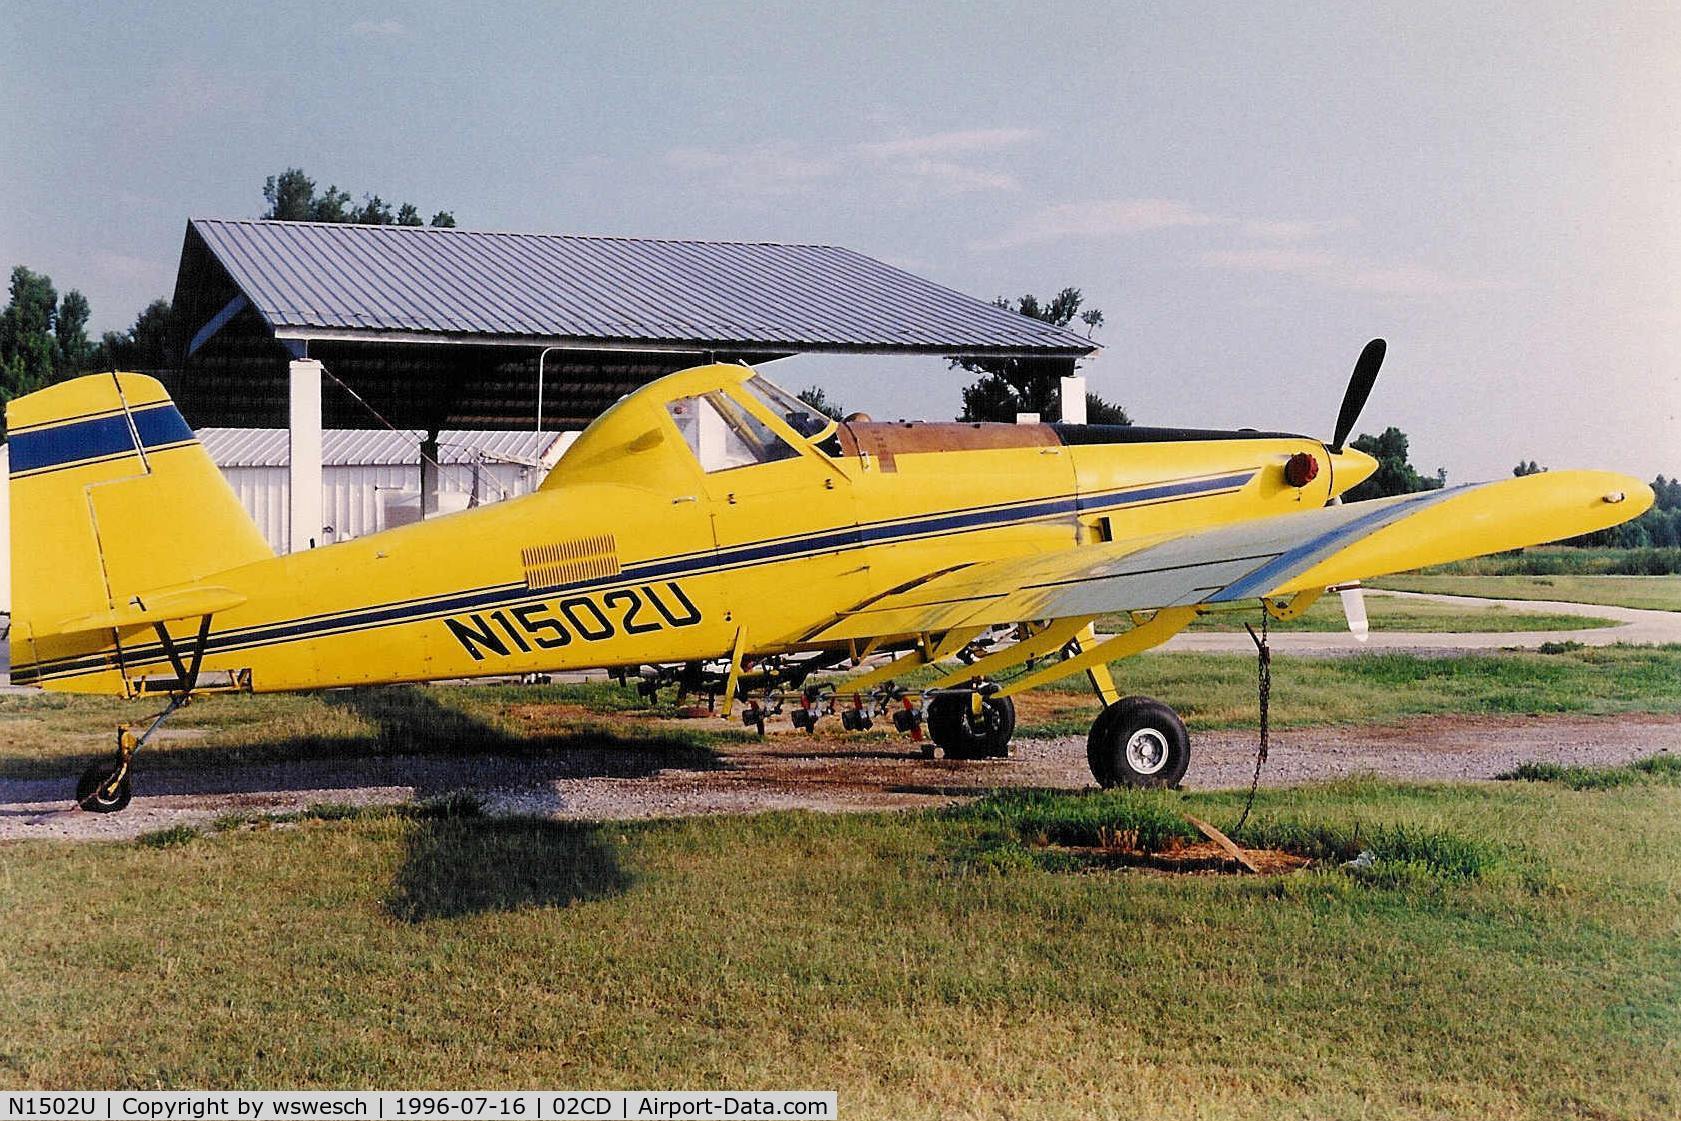 N1502U, 1991 Air Tractor Inc AT-502 C/N 502-0139, 1991 Air tractor AT-502, #502-0139.  Shannon Agricultural Flying-Clarksdale, Mississippi.